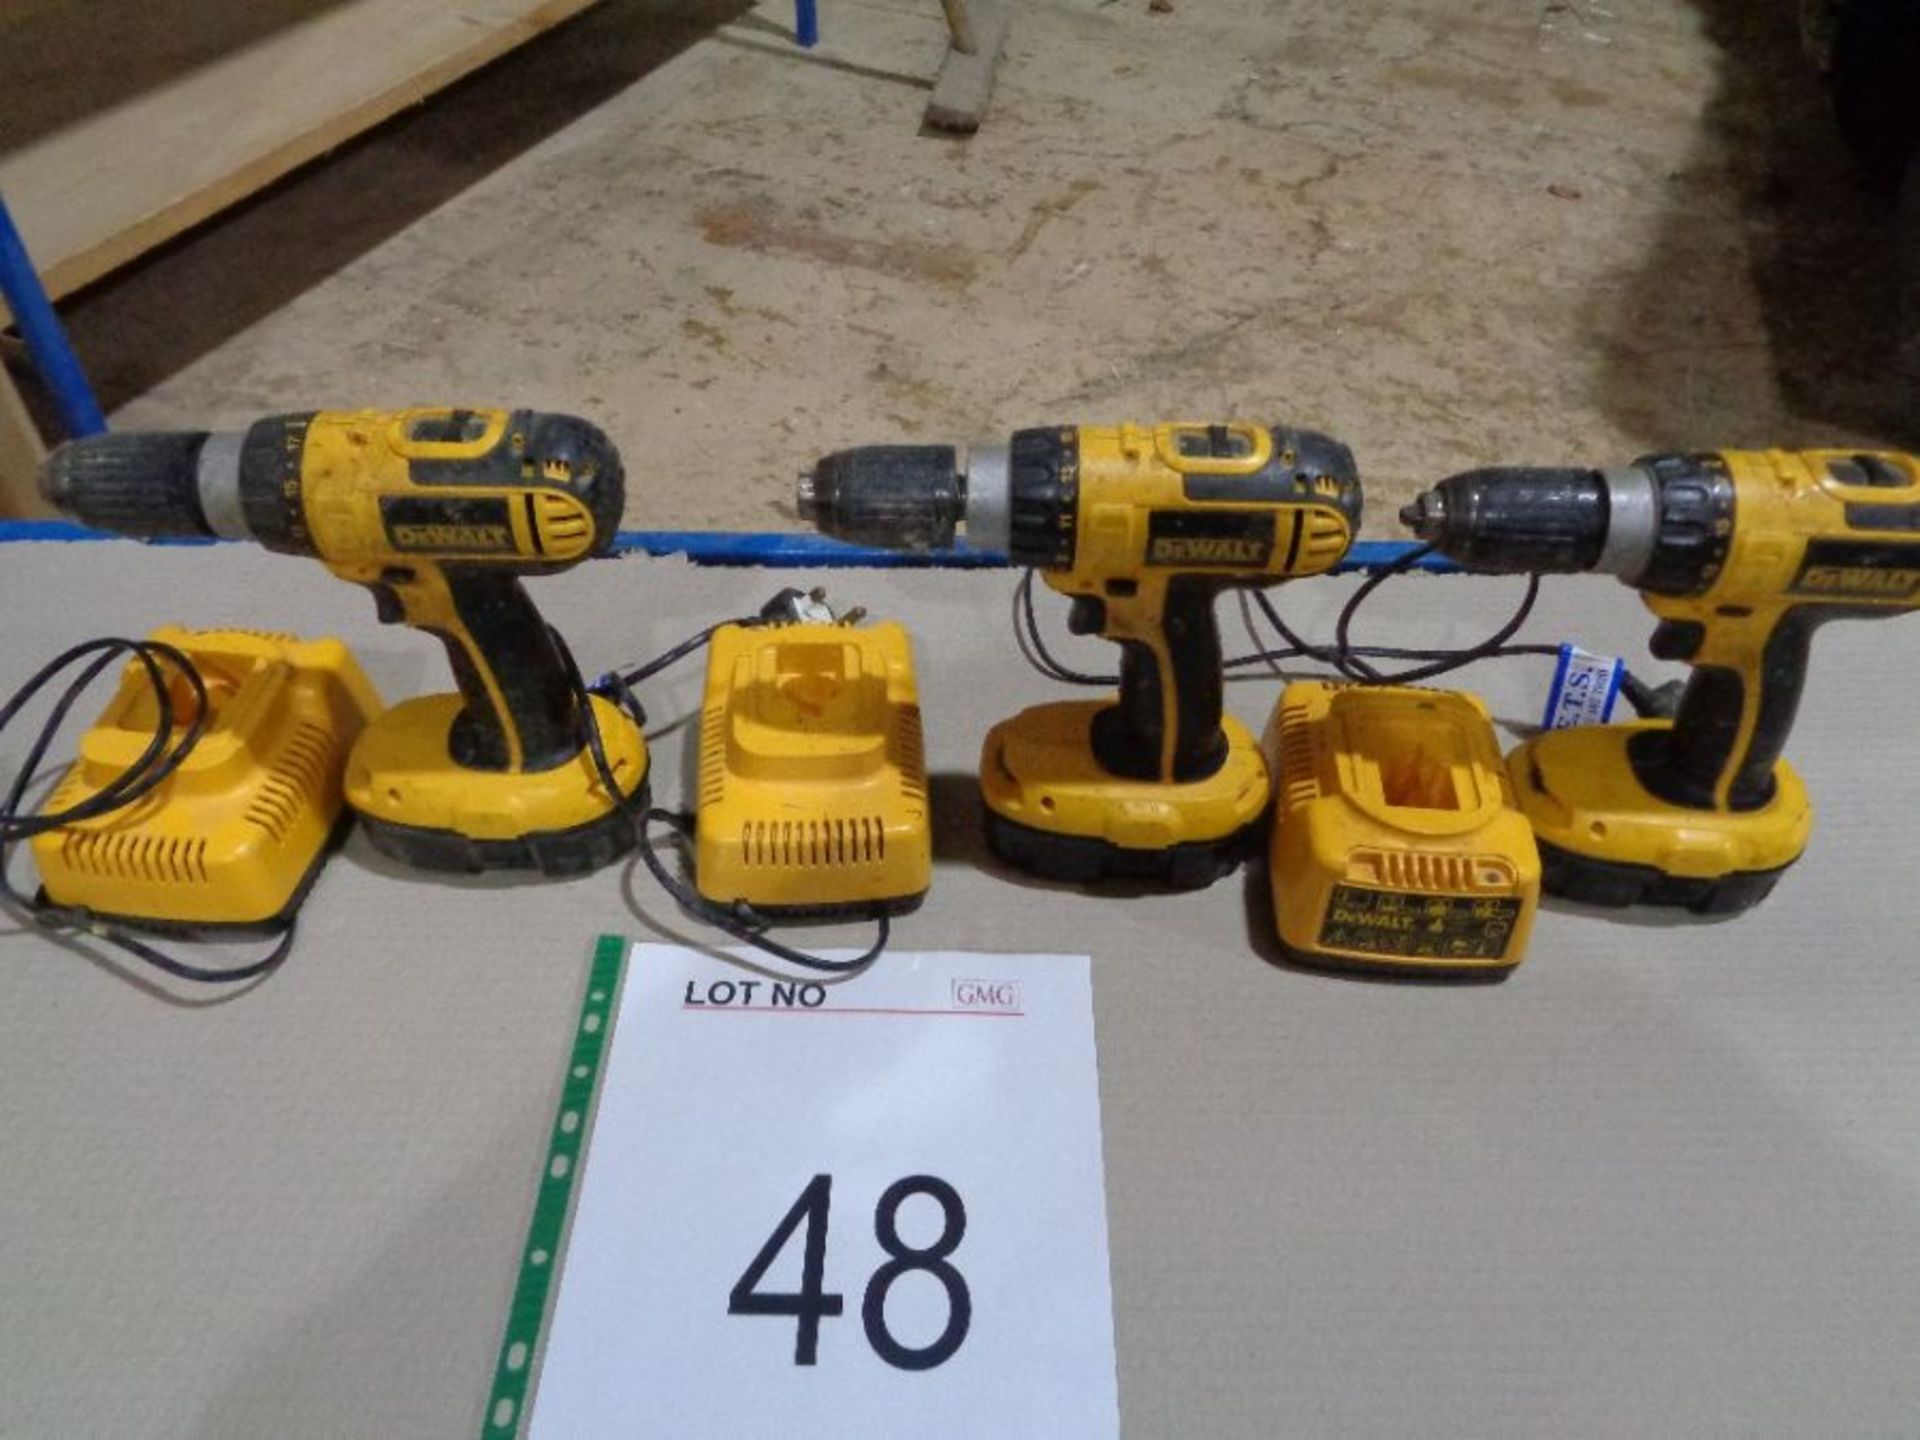 3 x Dewalt DC725 Power Drills with Chargers as Lotted